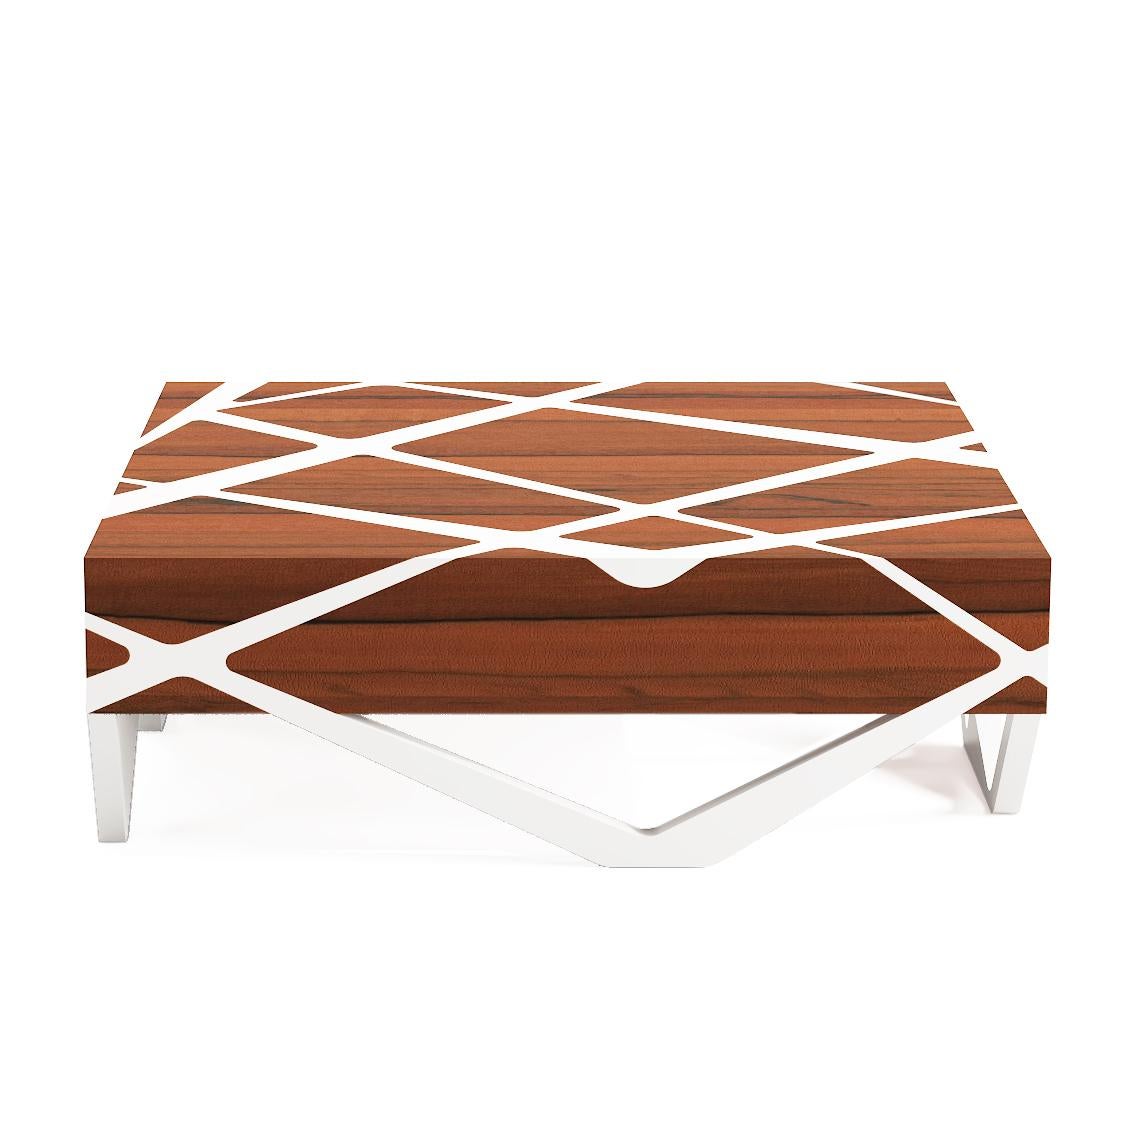 Inspired by the Sacred Ceiba trees in Havana, this elegant coffee table is handcrafted using carefully selected walnut wood veneers. Perfect for both contemporary and traditional homes, the combinations are endless.

We can also produce this in